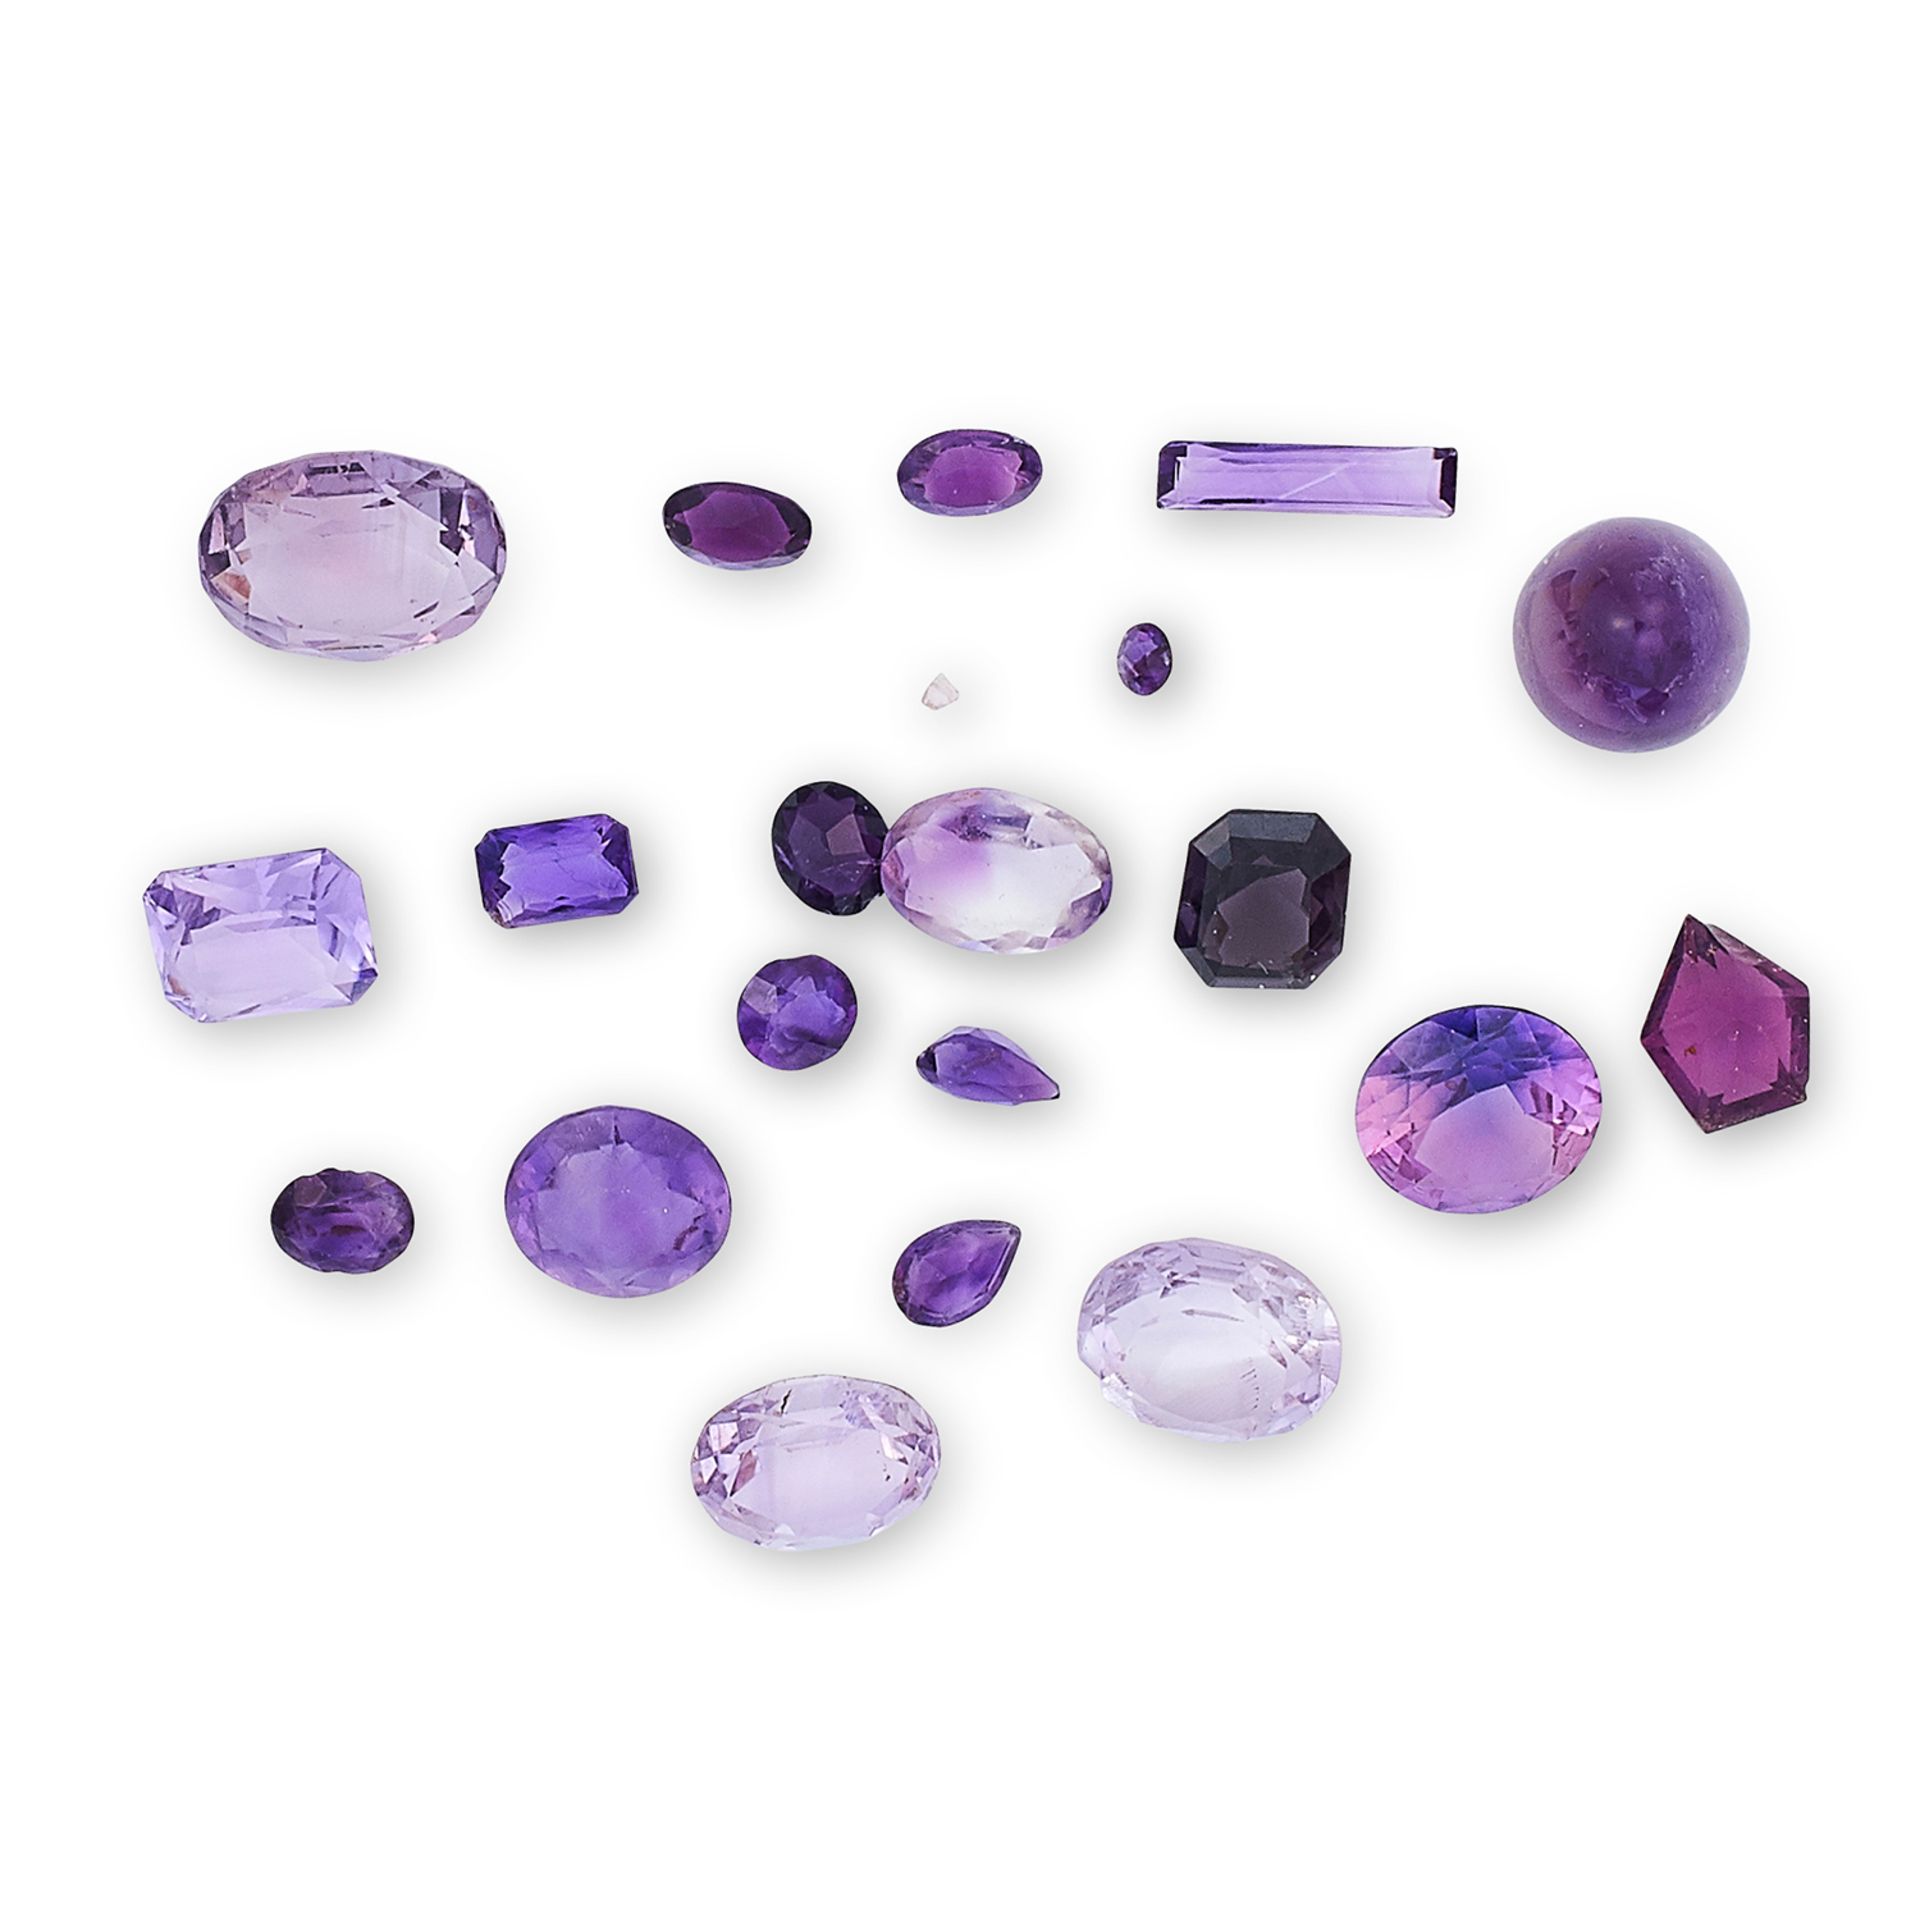 PARCEL OF MIXED CUT AMETHYSTS including a cabochon, 46.5 carat total weight.